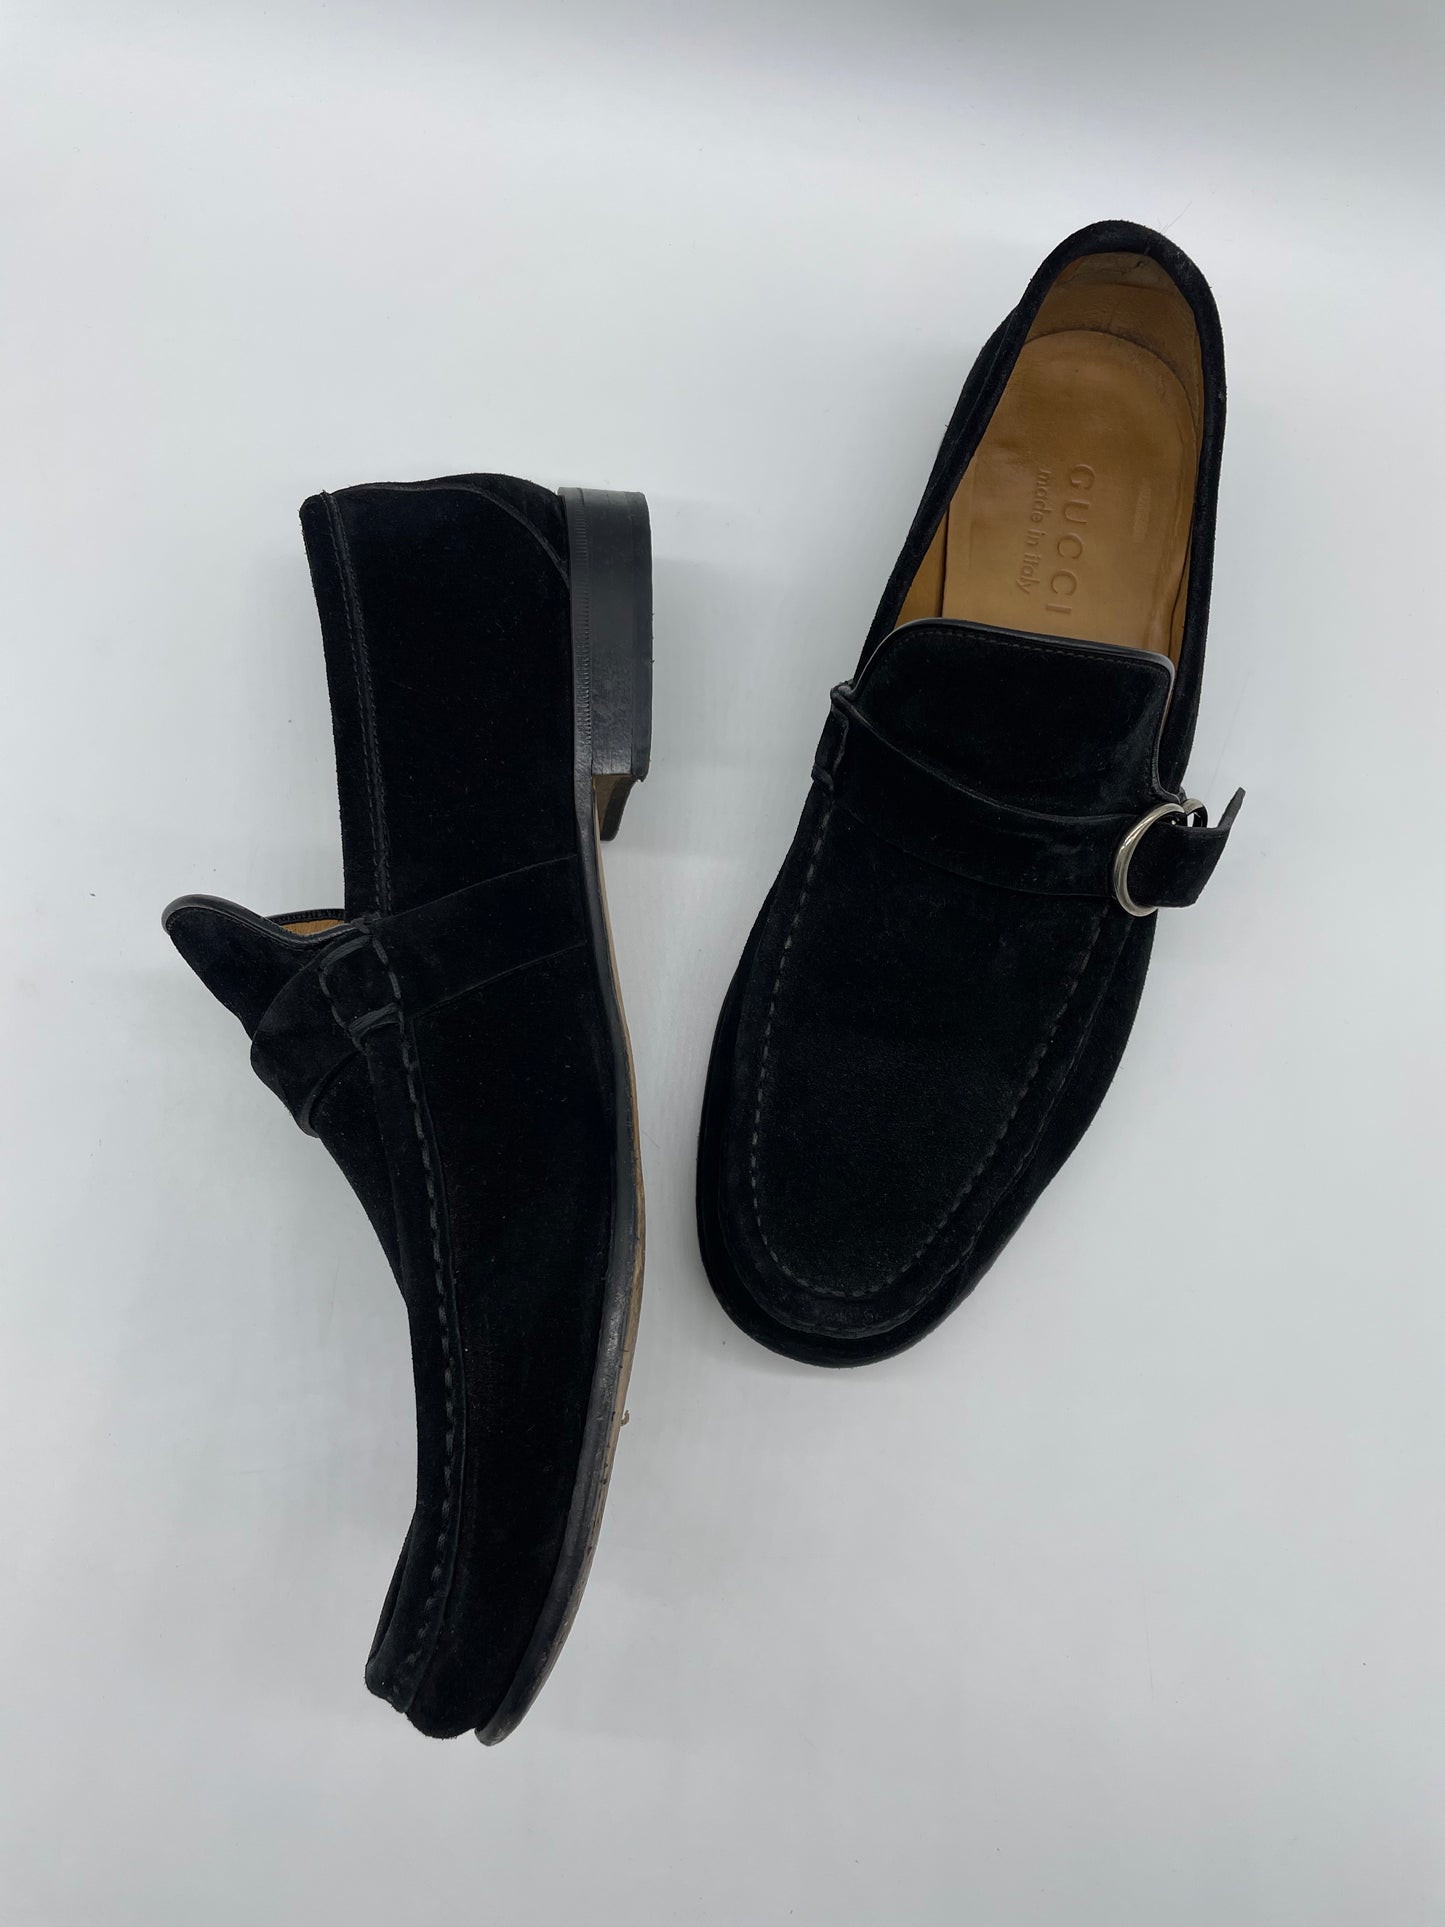 Gucci-Loafer